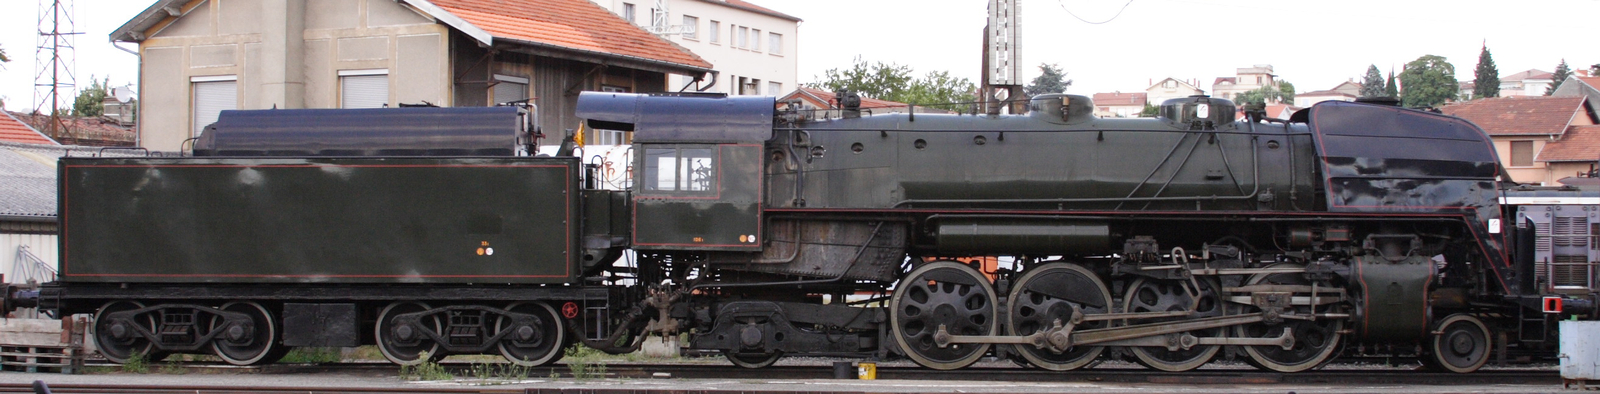 141 R 1126 in July 2006 at Toulouse-Matabiau station